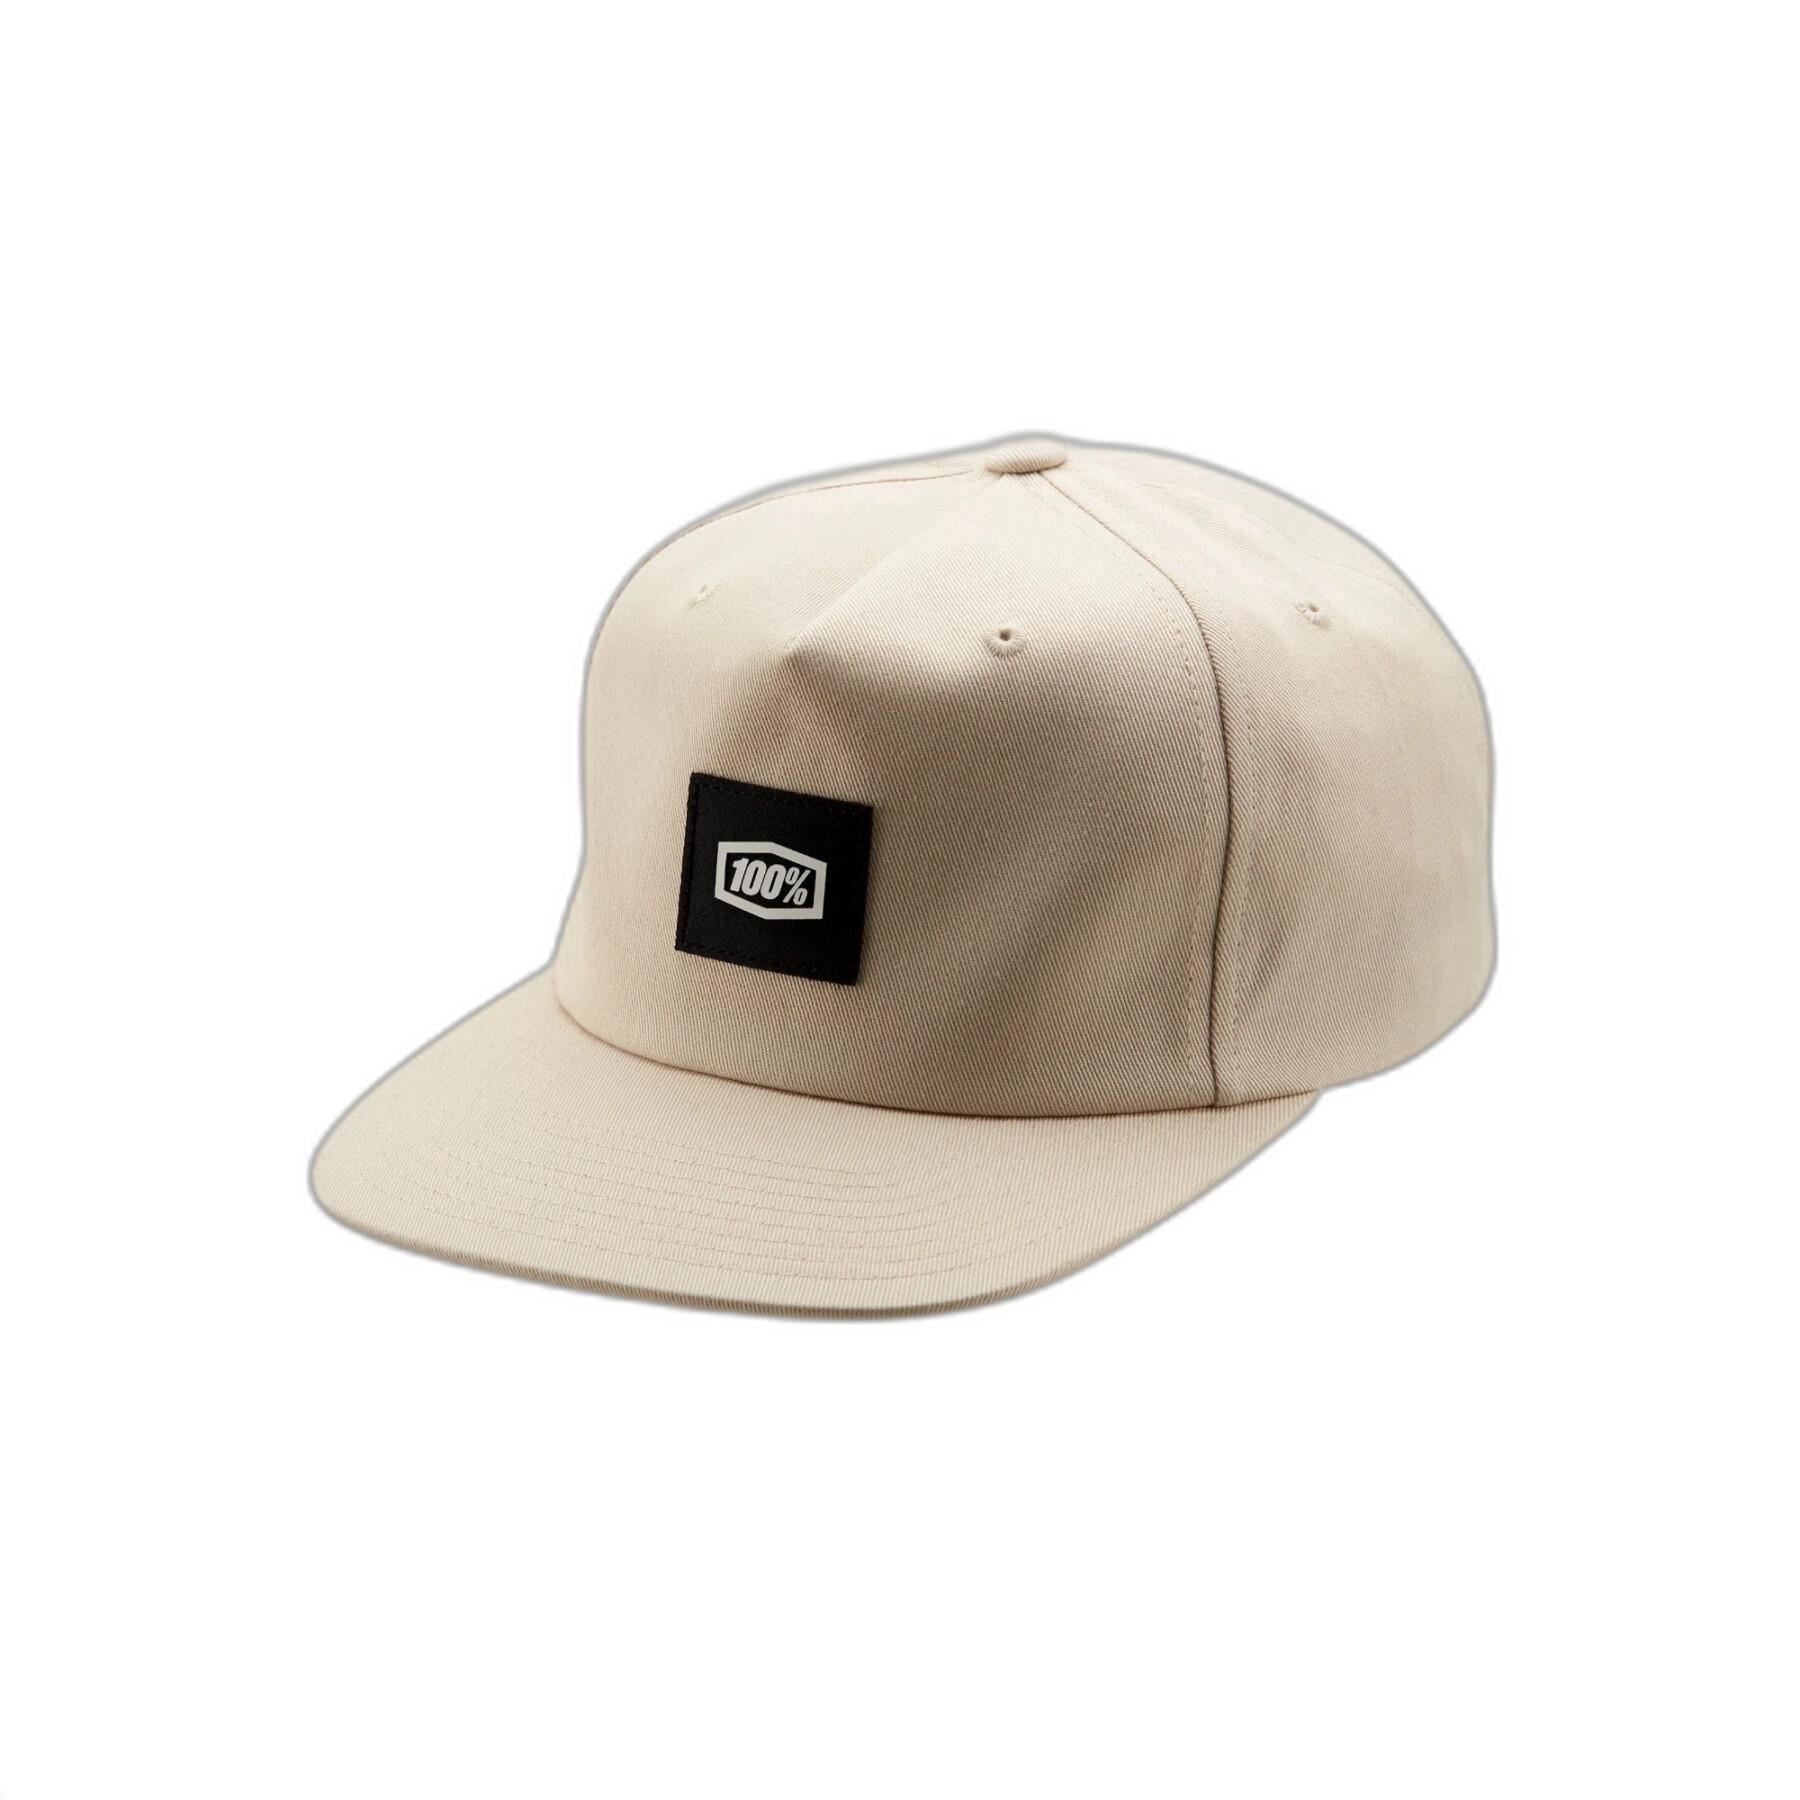 Mütze 100% lincoln snapback unstructured lyp fit